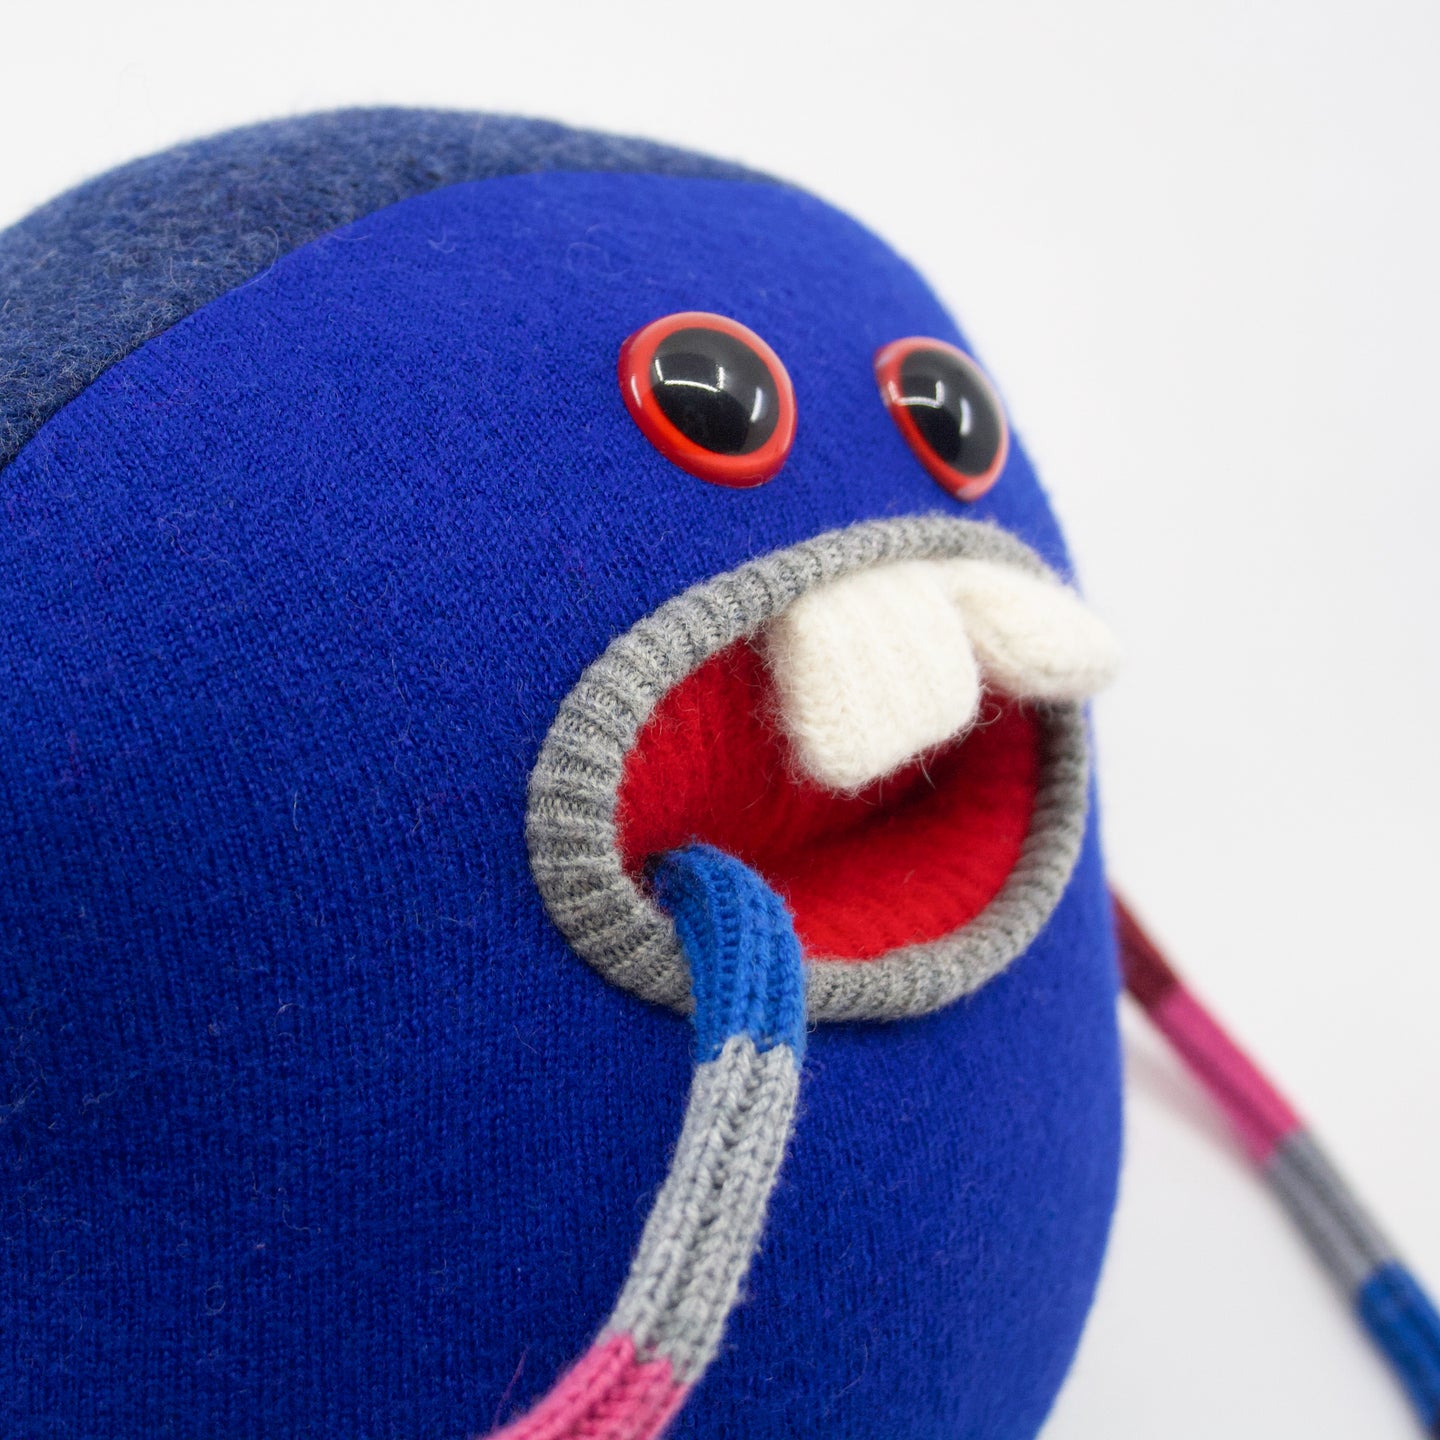 blue stuffed cute monster plush with red eyes and pocket mouth